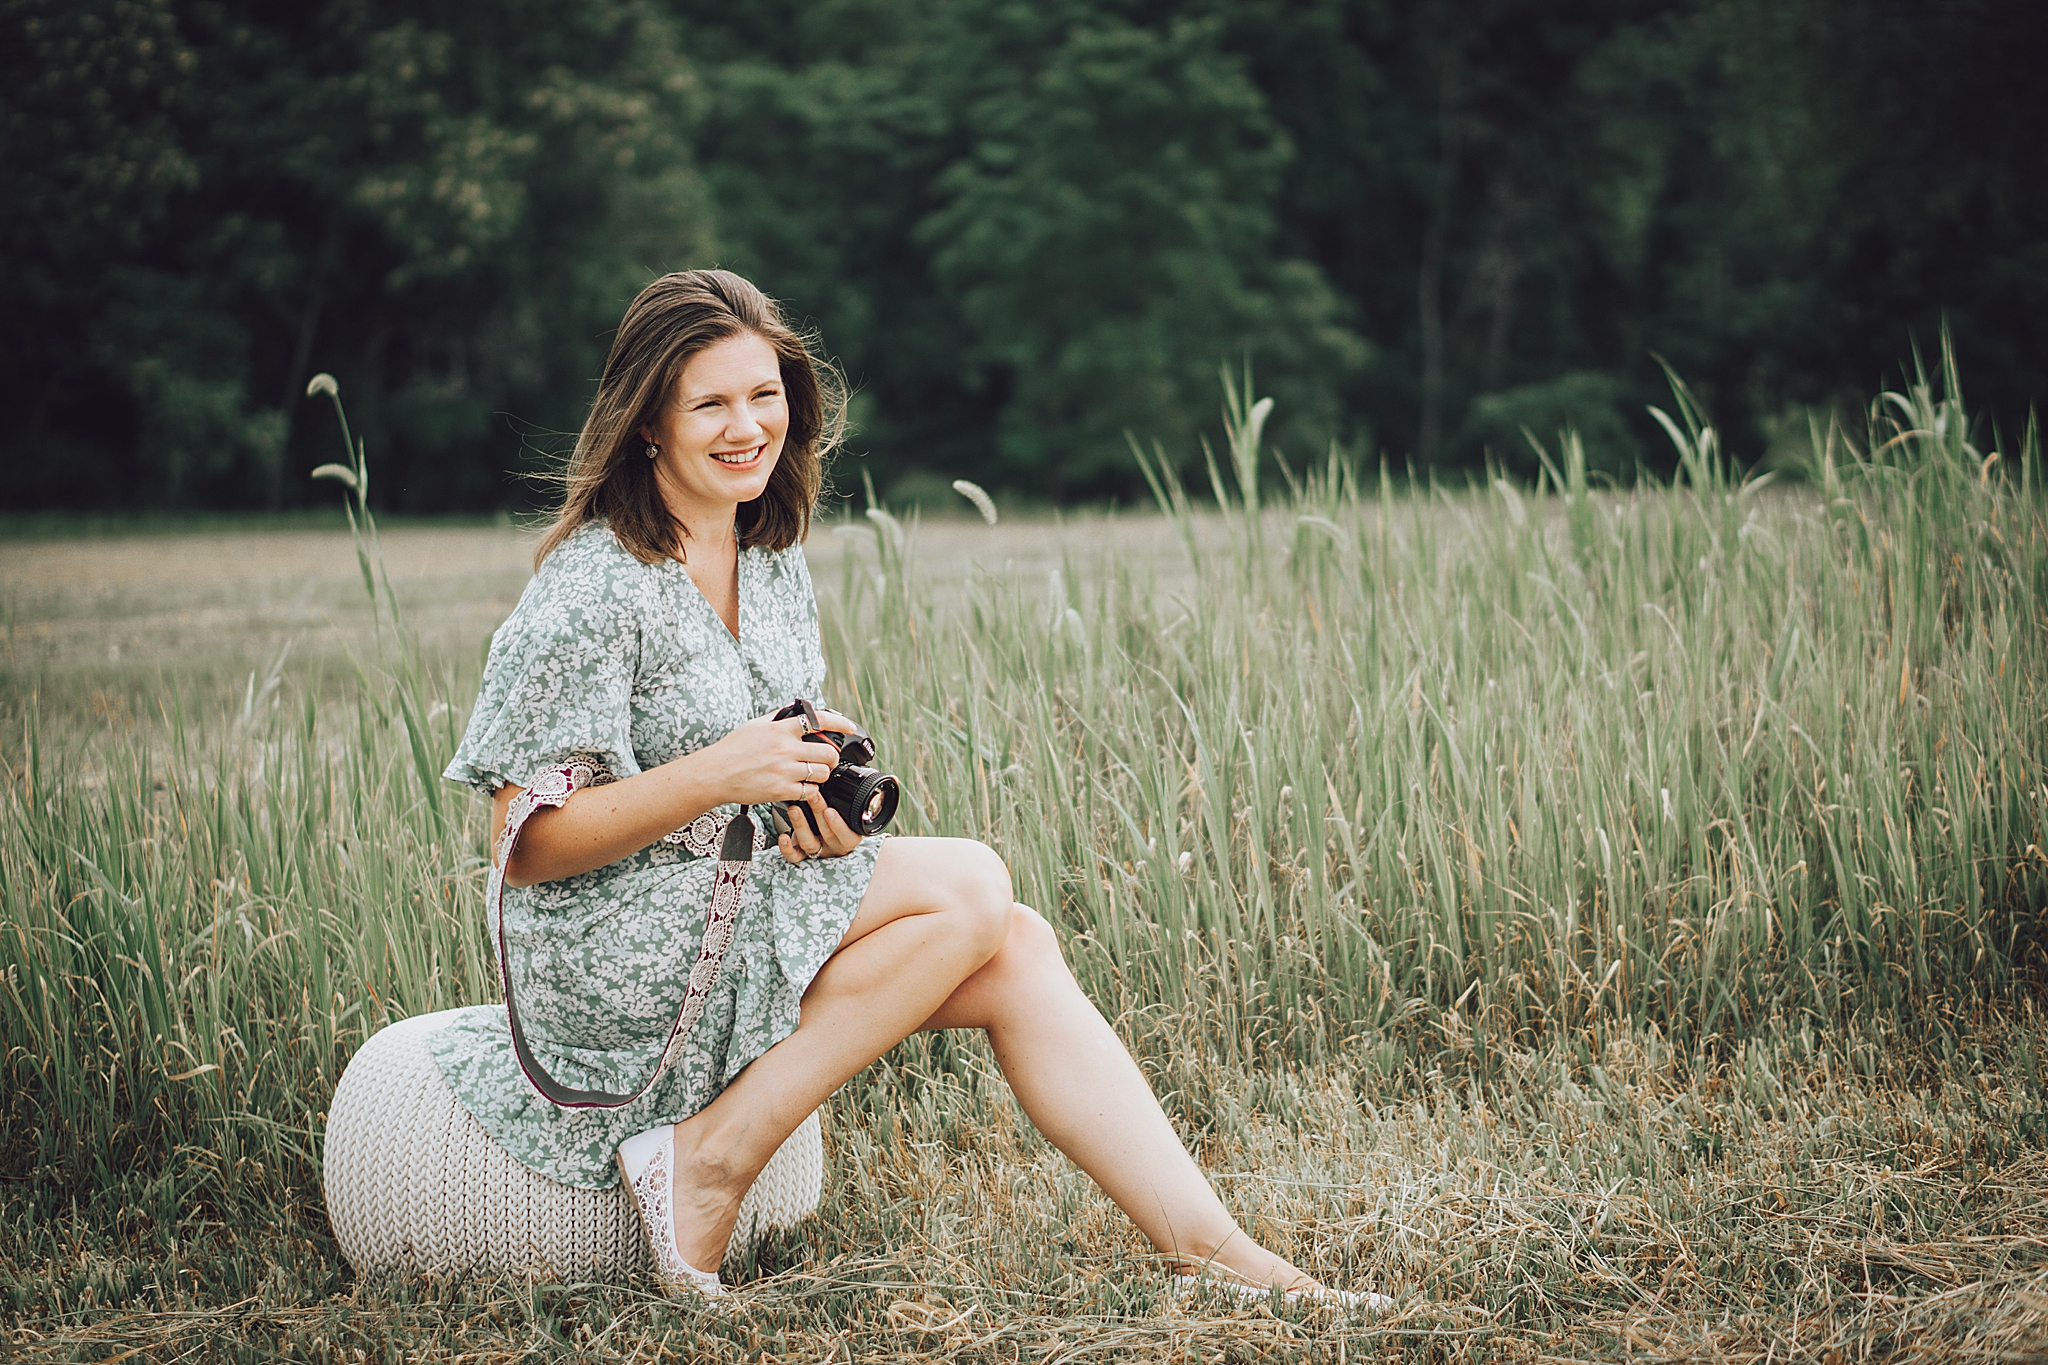 Frederick MD family photographer shares what's in her bag